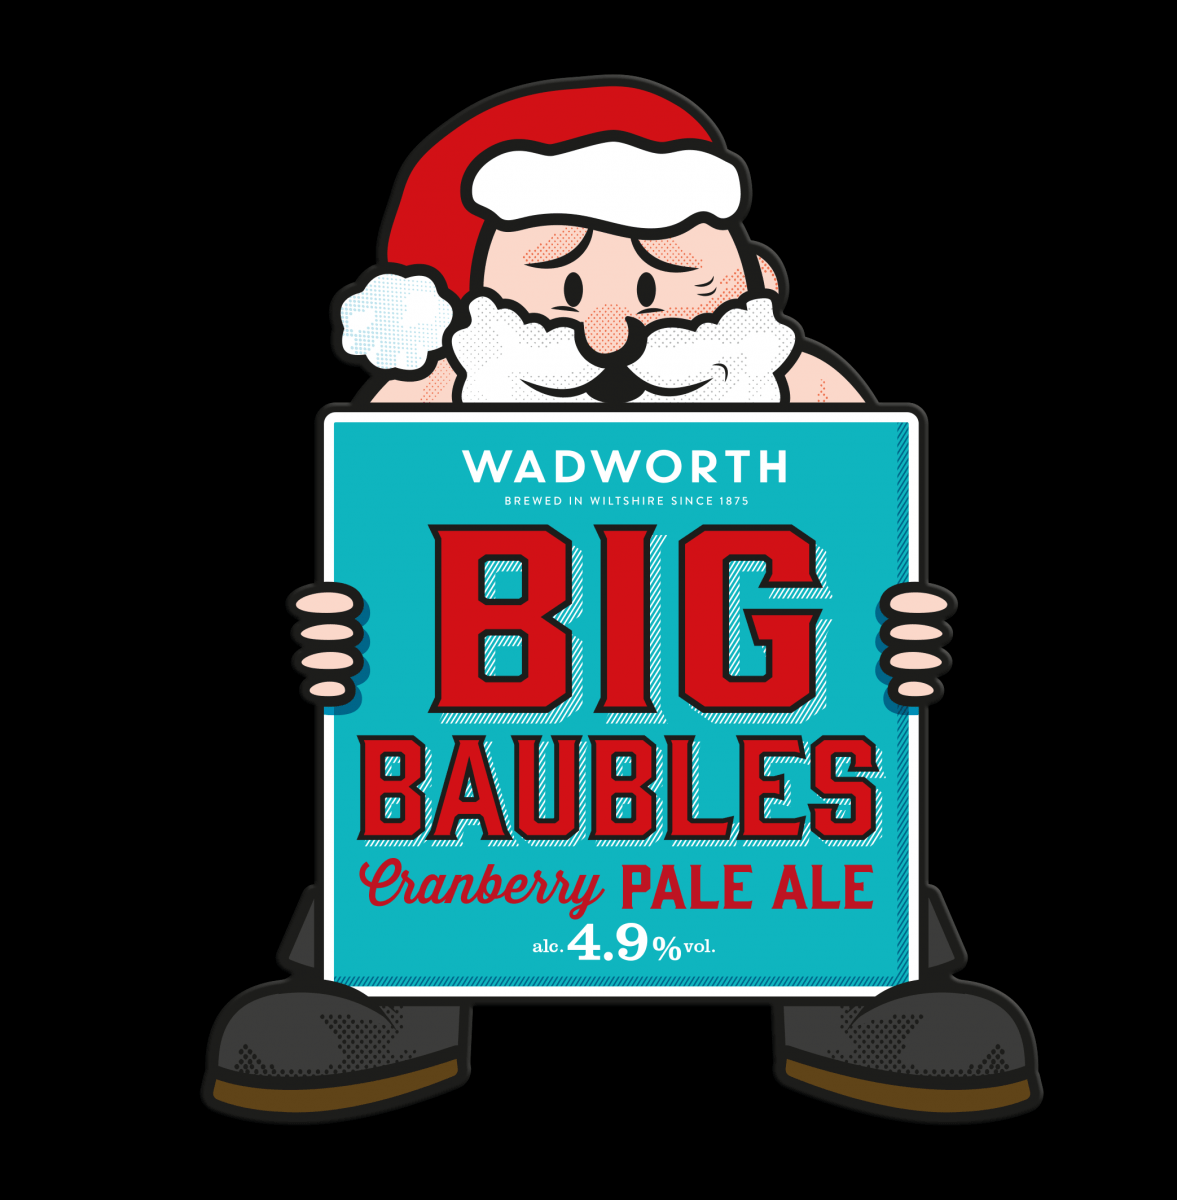 Wadworth Brewery announces four brand new seasonal ales for 2018!